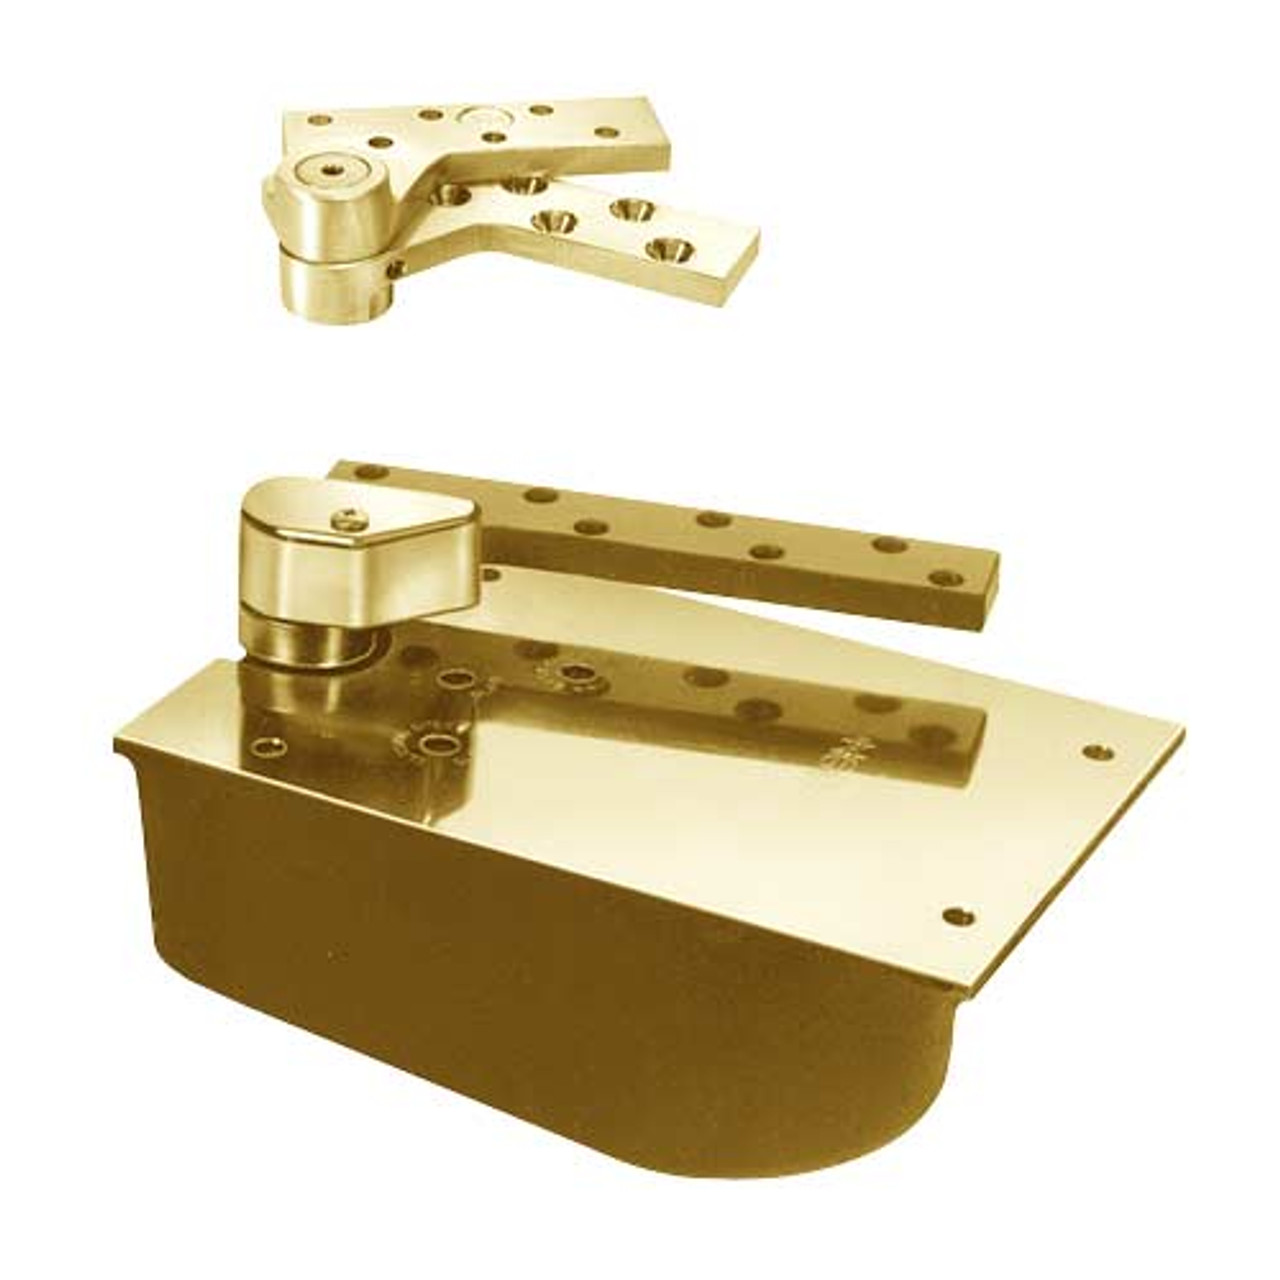 L27-95N-CWF-LH-1-3/4-605 Rixson 27 Series Extra Heavy Duty Lead Lined Offset Floor Closer in Bright Brass Finish